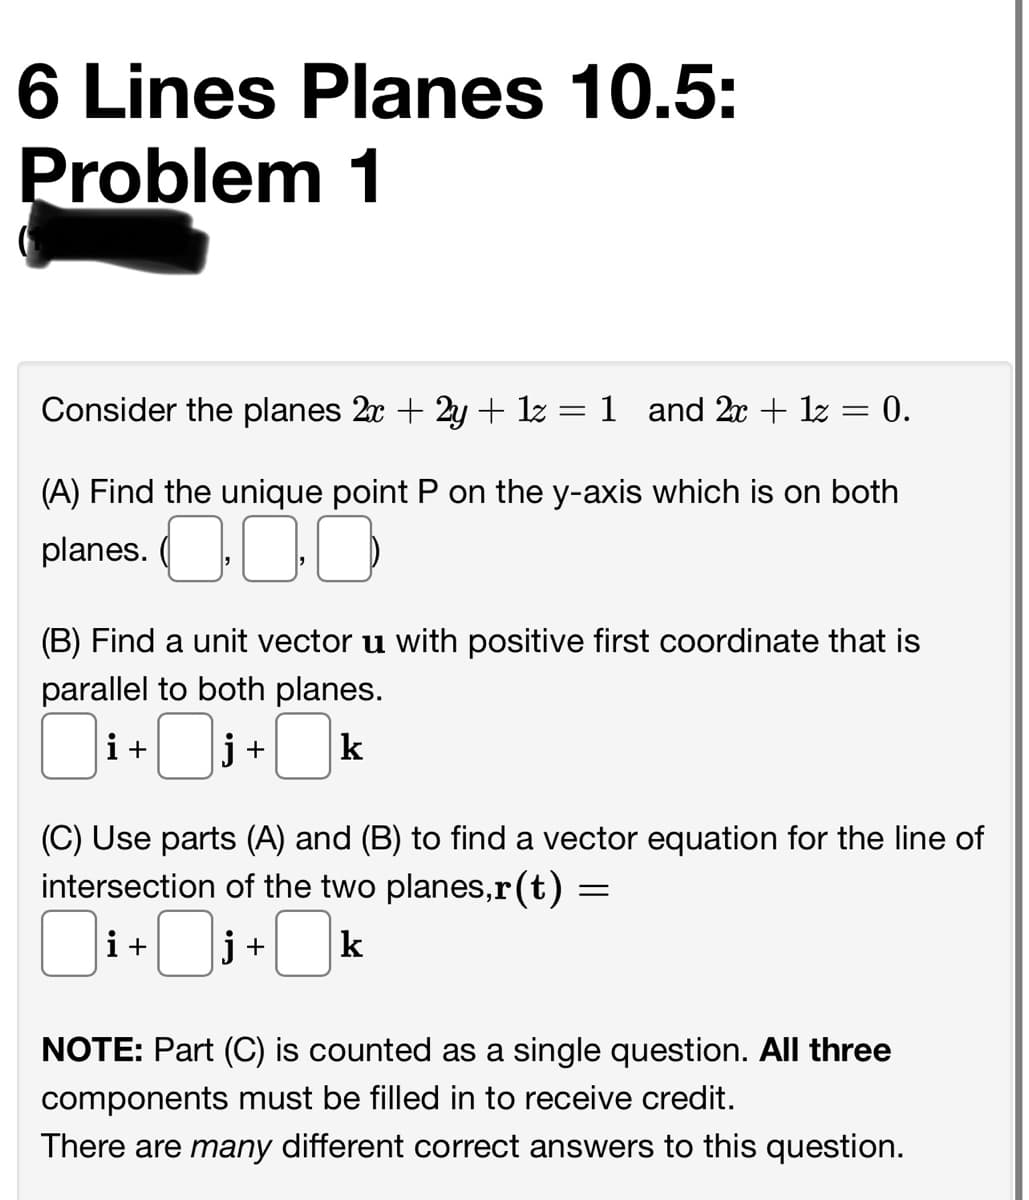 6 Lines Planes 10.5:
Problem 1
Consider the planes 2x + 2y + 1z = 1 and 2x + 1z = 0.
%3|
(A) Find the unique point P on the y-axis which is on both
planes. O00
(B) Find a unit vector u with positive first coordinate that is
parallel to both planes.
i+
j +
k
(C) Use parts (A) and (B) to find a vector equation for the line of
intersection of the two planes,r(t) :
i+:
j +
k
NOTE: Part (C) is counted as a single question. All three
components must be filled in to receive credit.
There are many different correct answers to this question.
